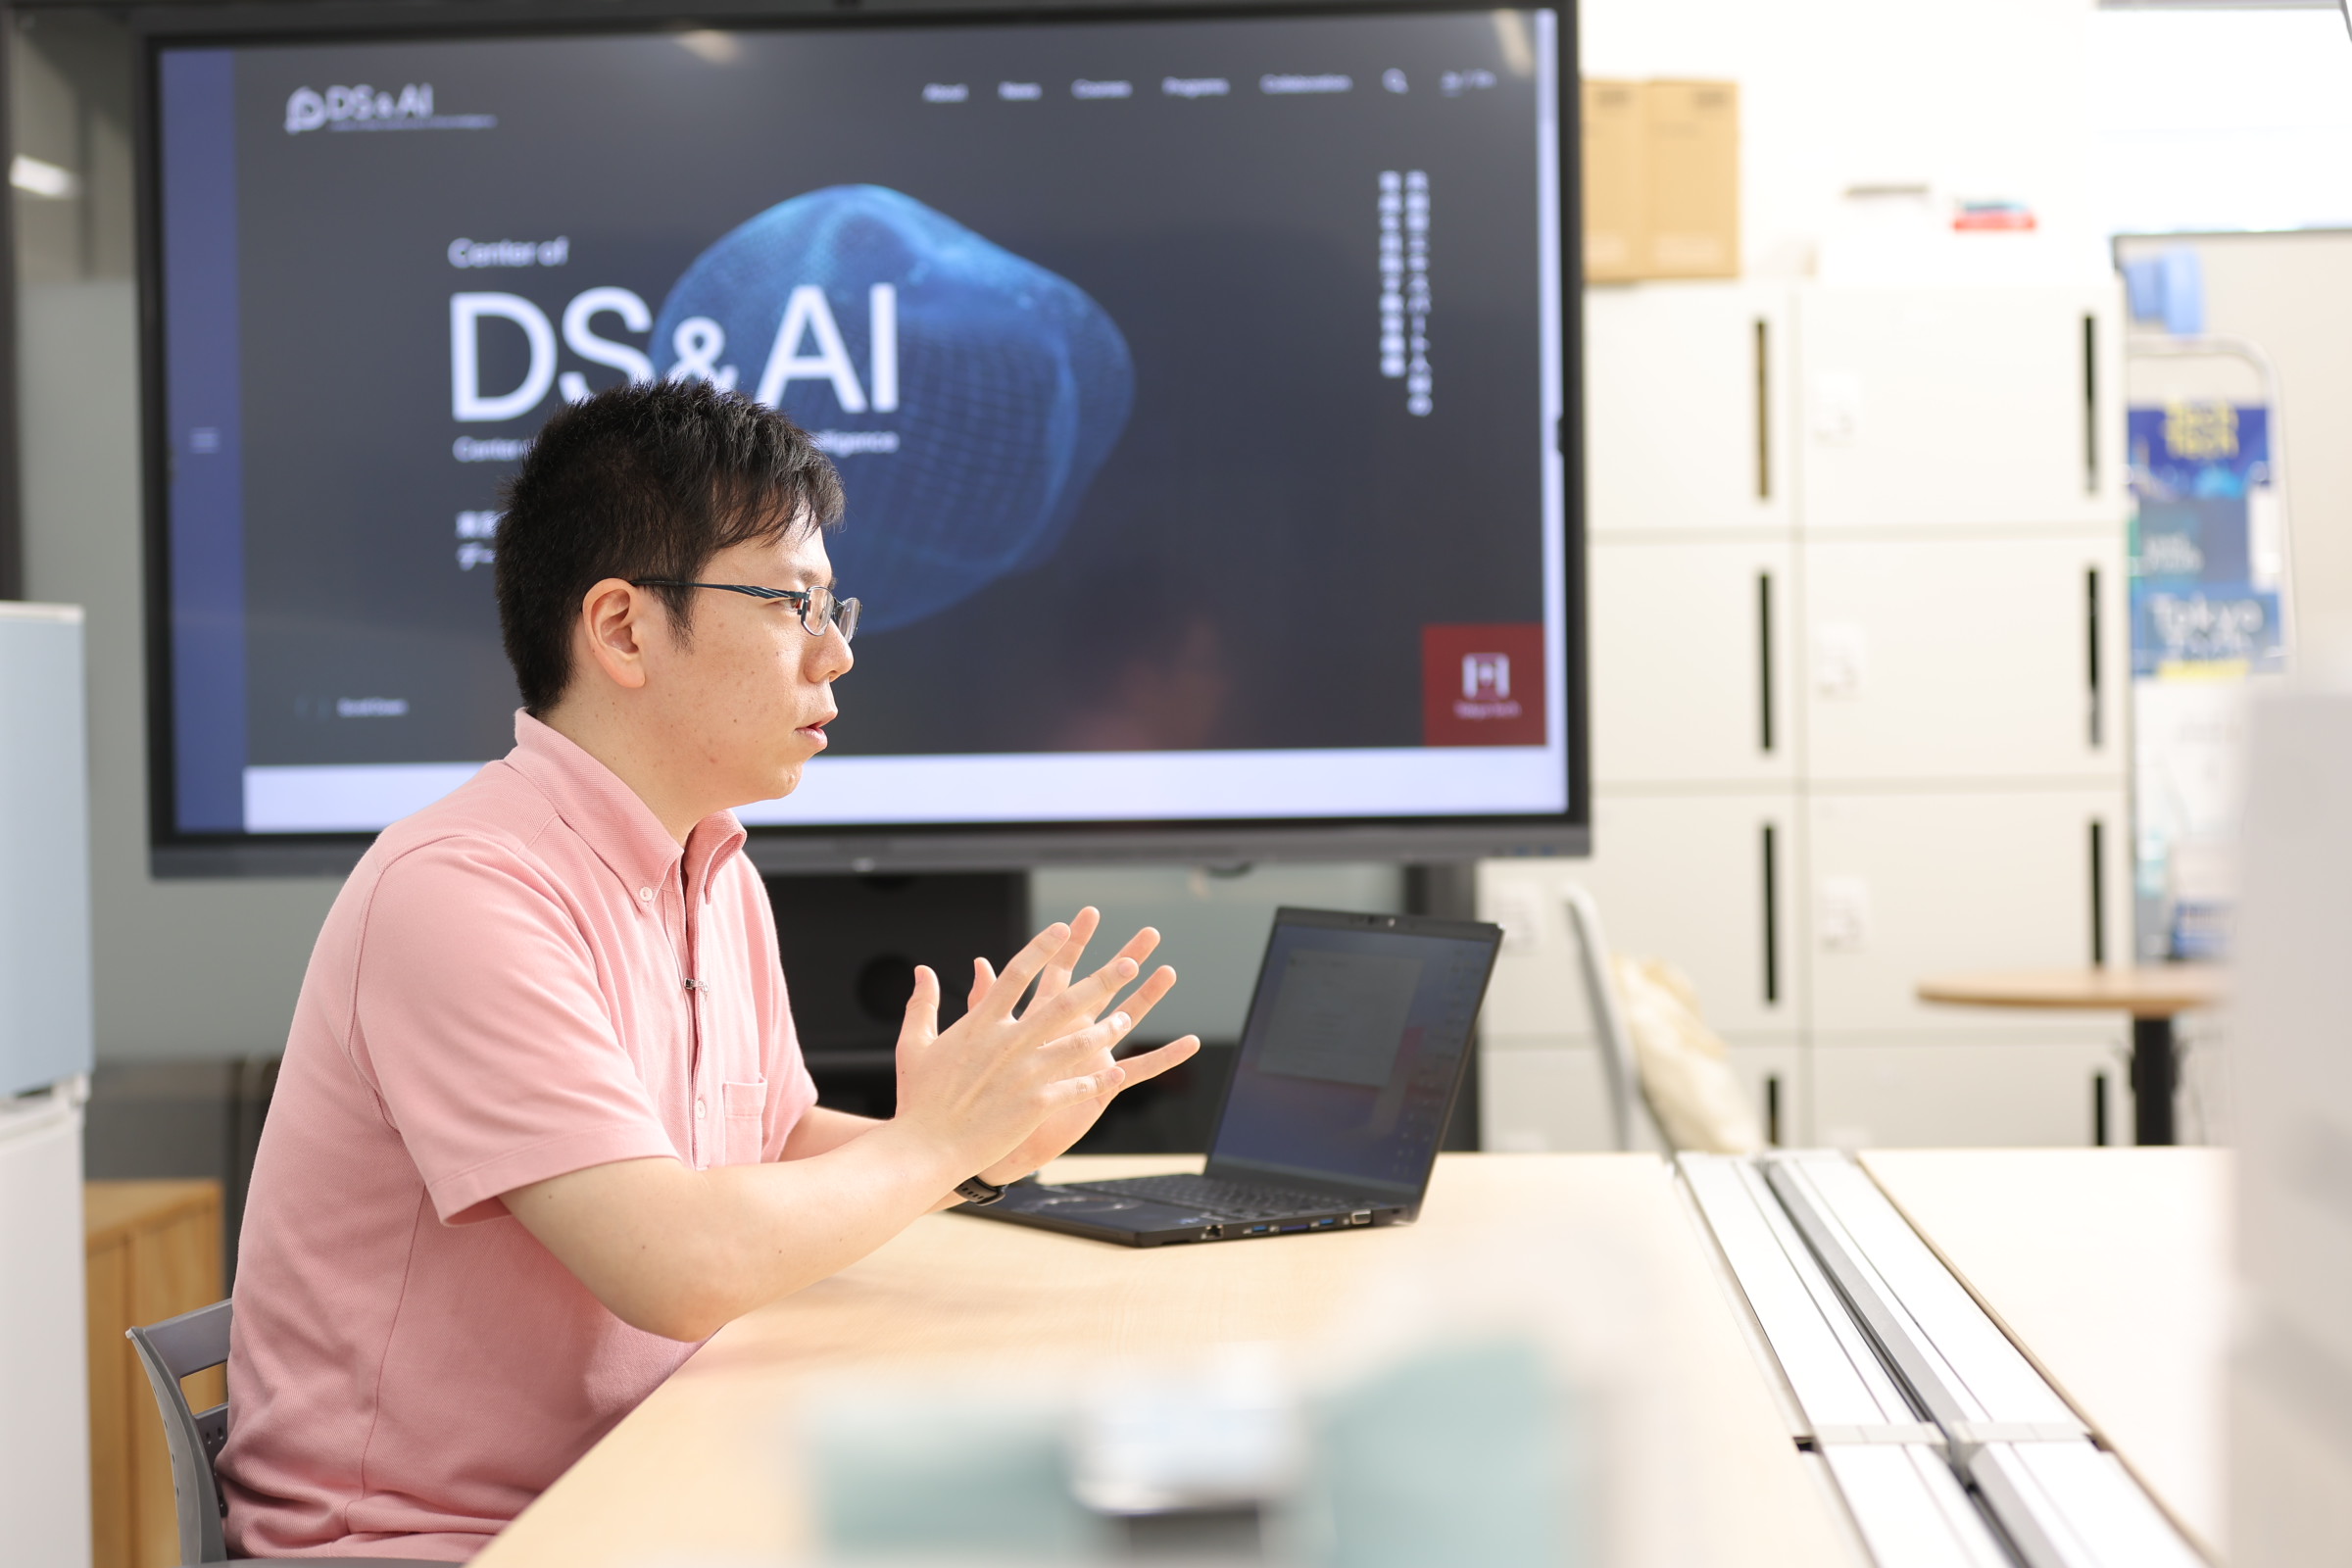 Dr. Yanagisawa, this may have already been understood, but what is the Center of Data Science and Artificial Intelligence?